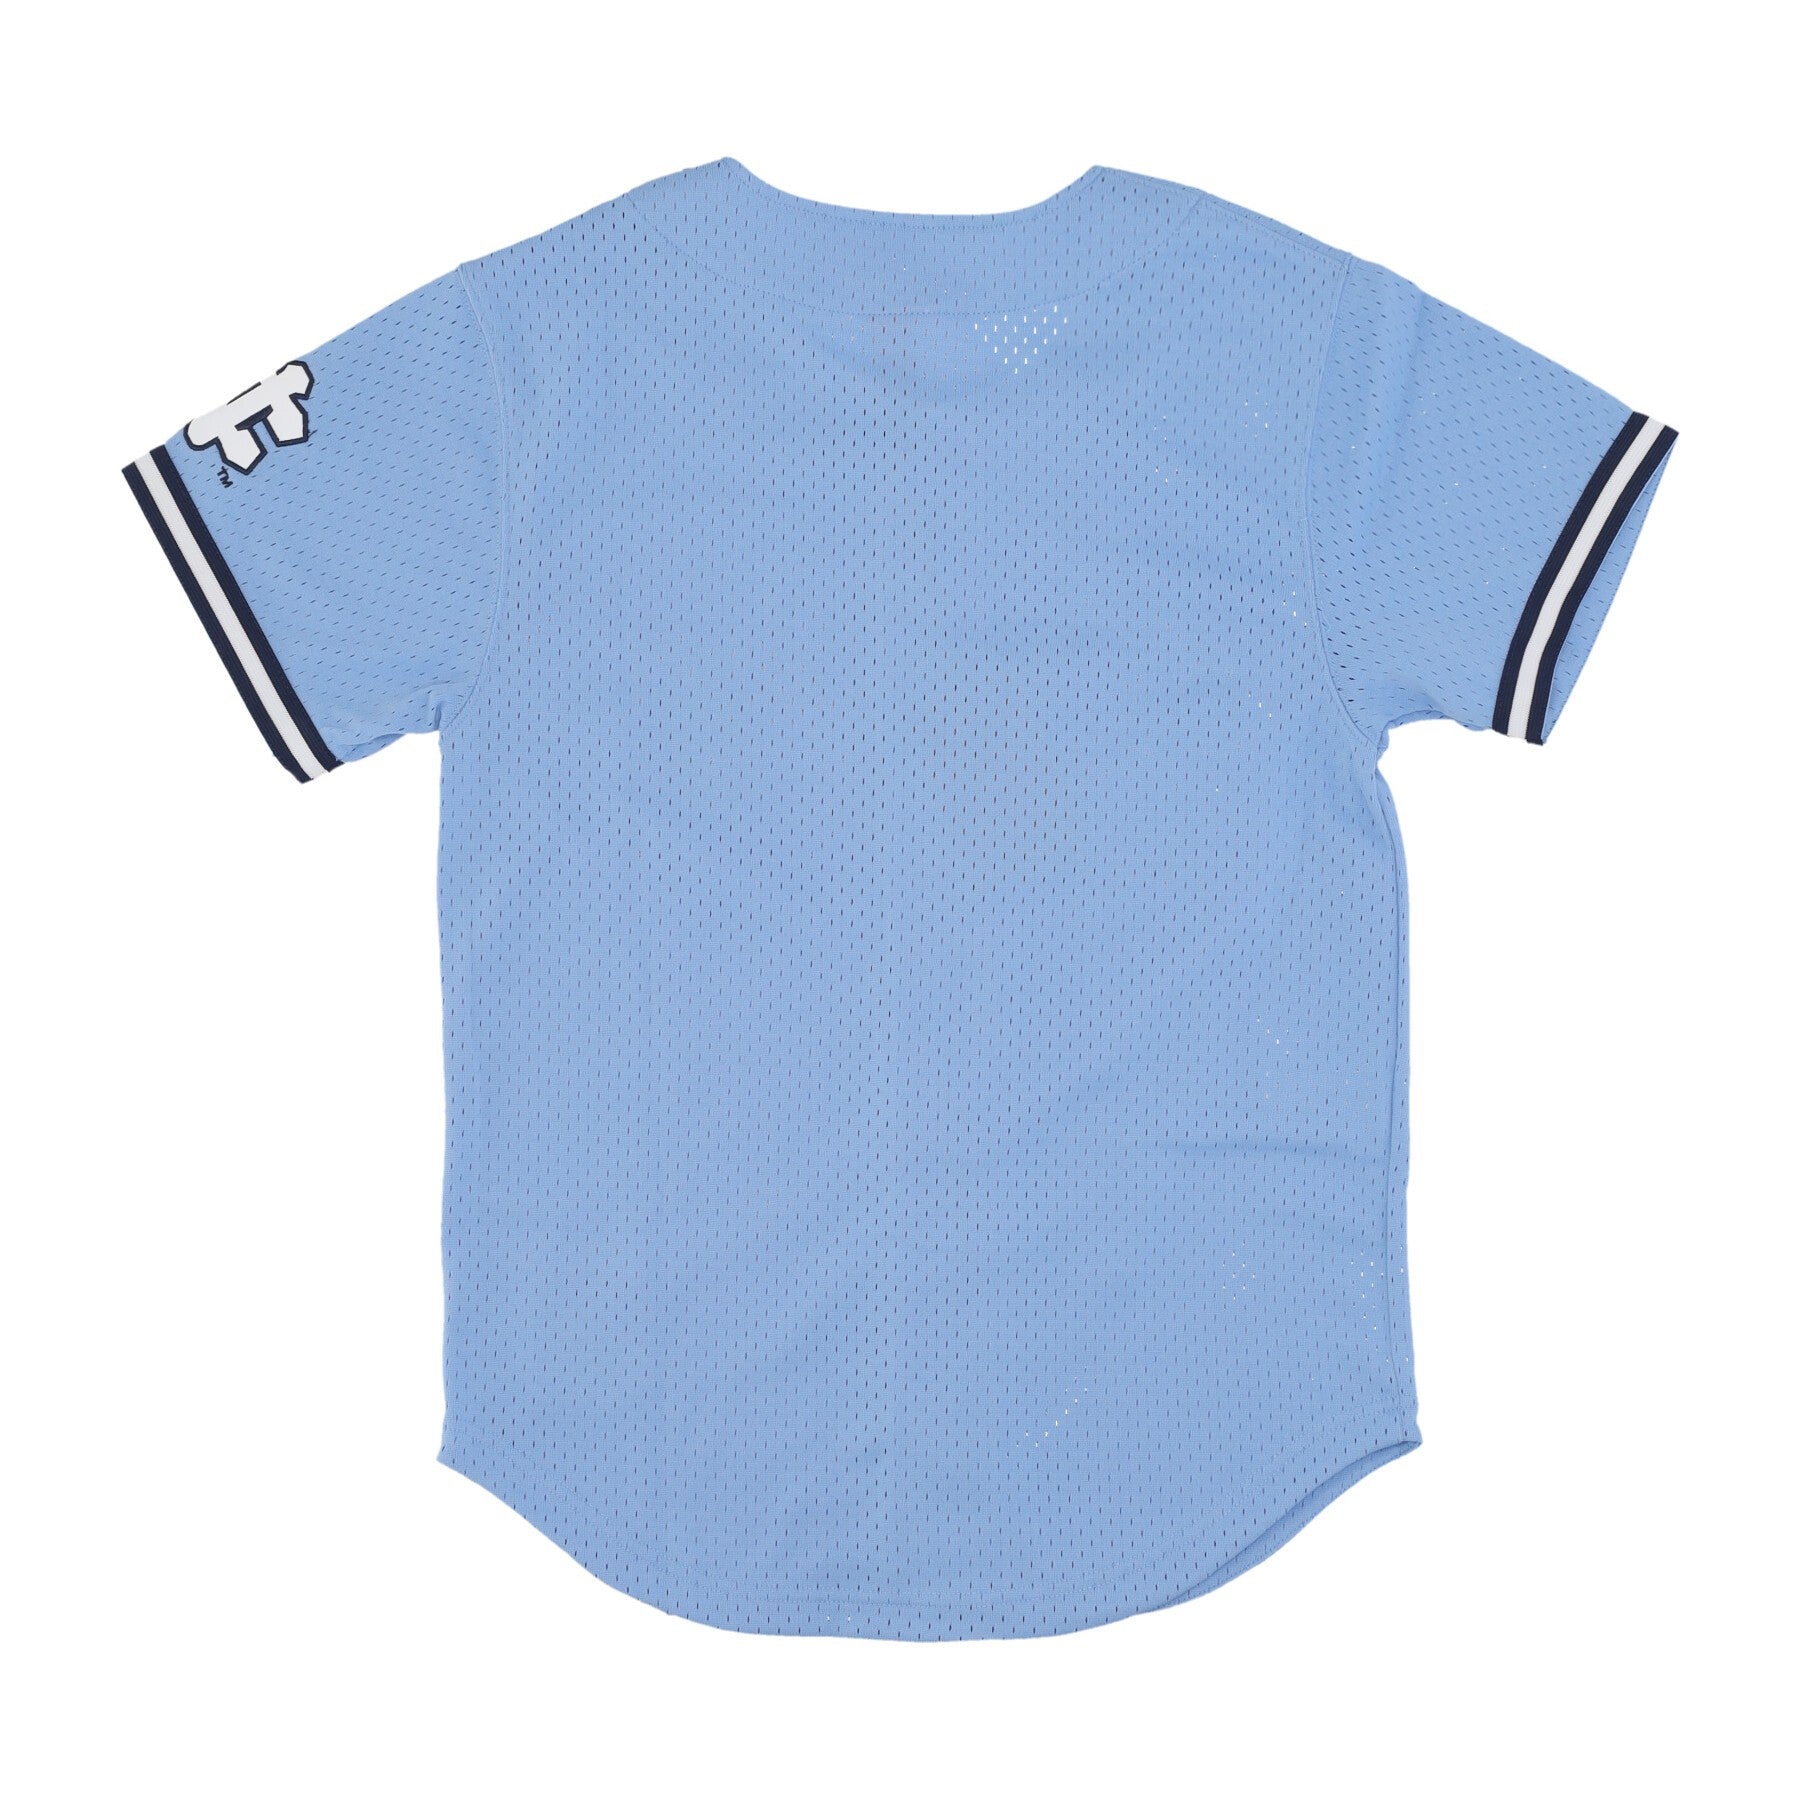 Mitchell & Ness, Casacca Bottoni Uomo Ncaa On The Clock Mesh Button Front Unchee, Light Blue